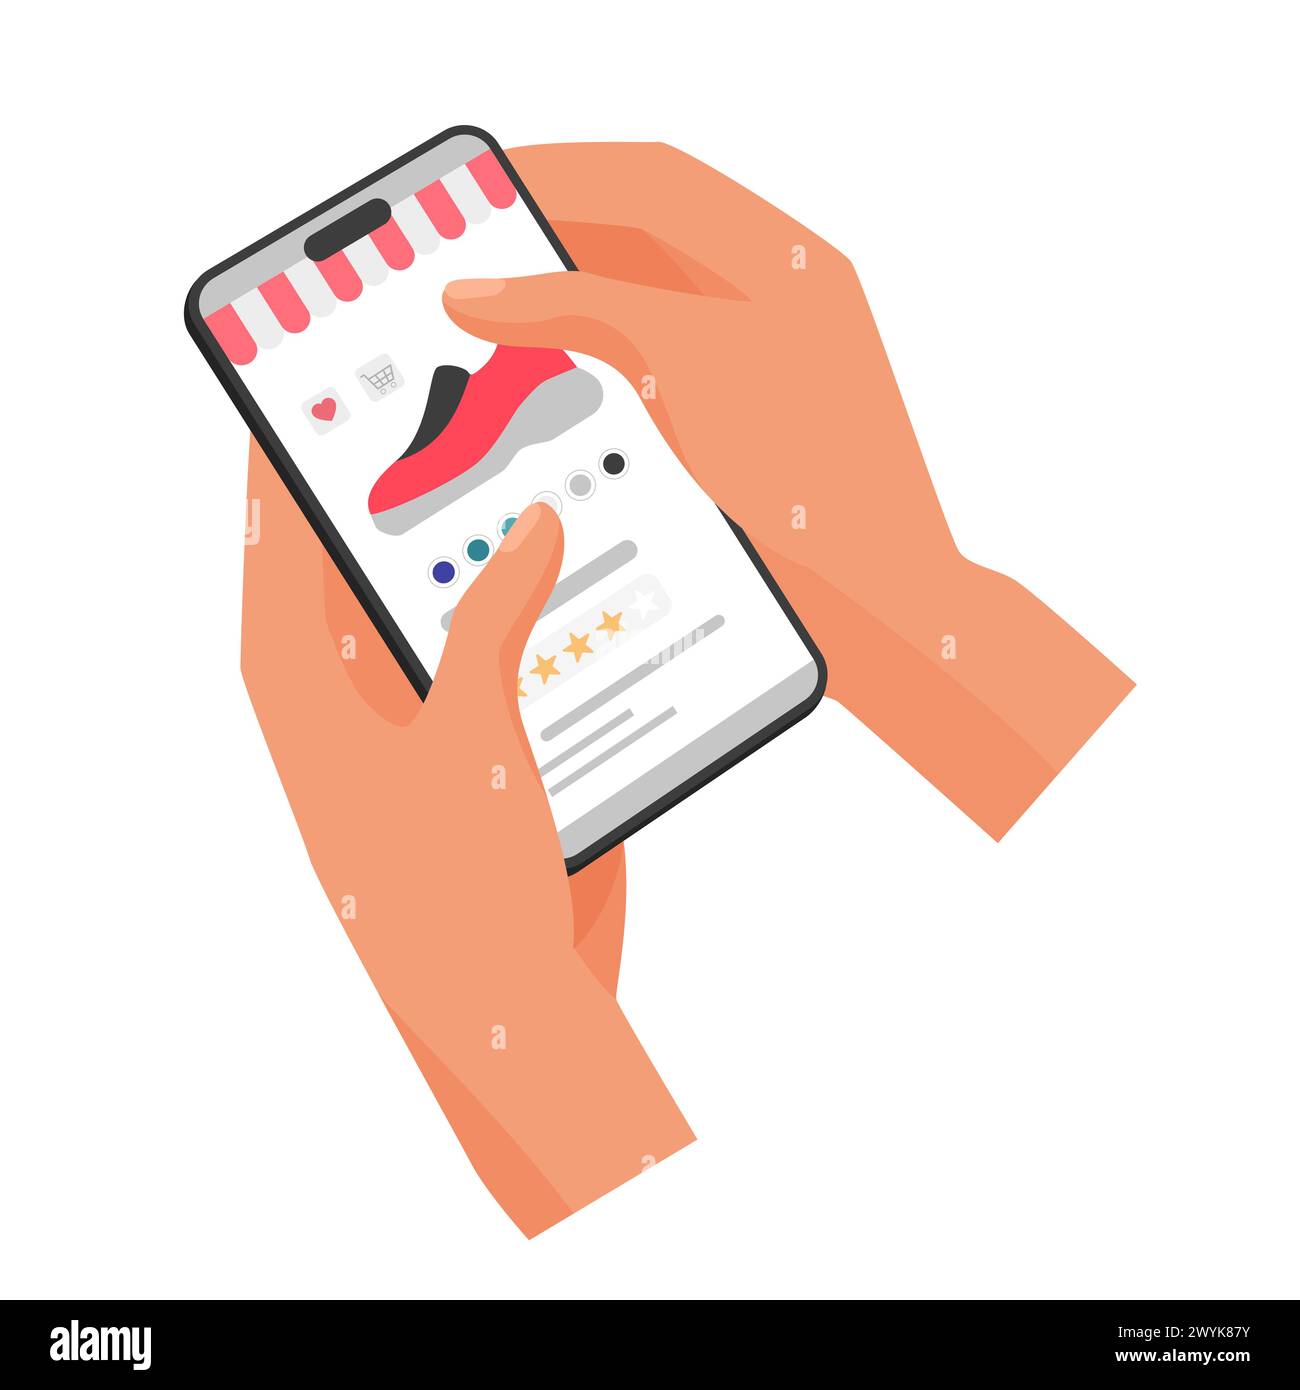 Hands holding mobile phone to rate quality of shoes with stars vector illustration Stock Vector